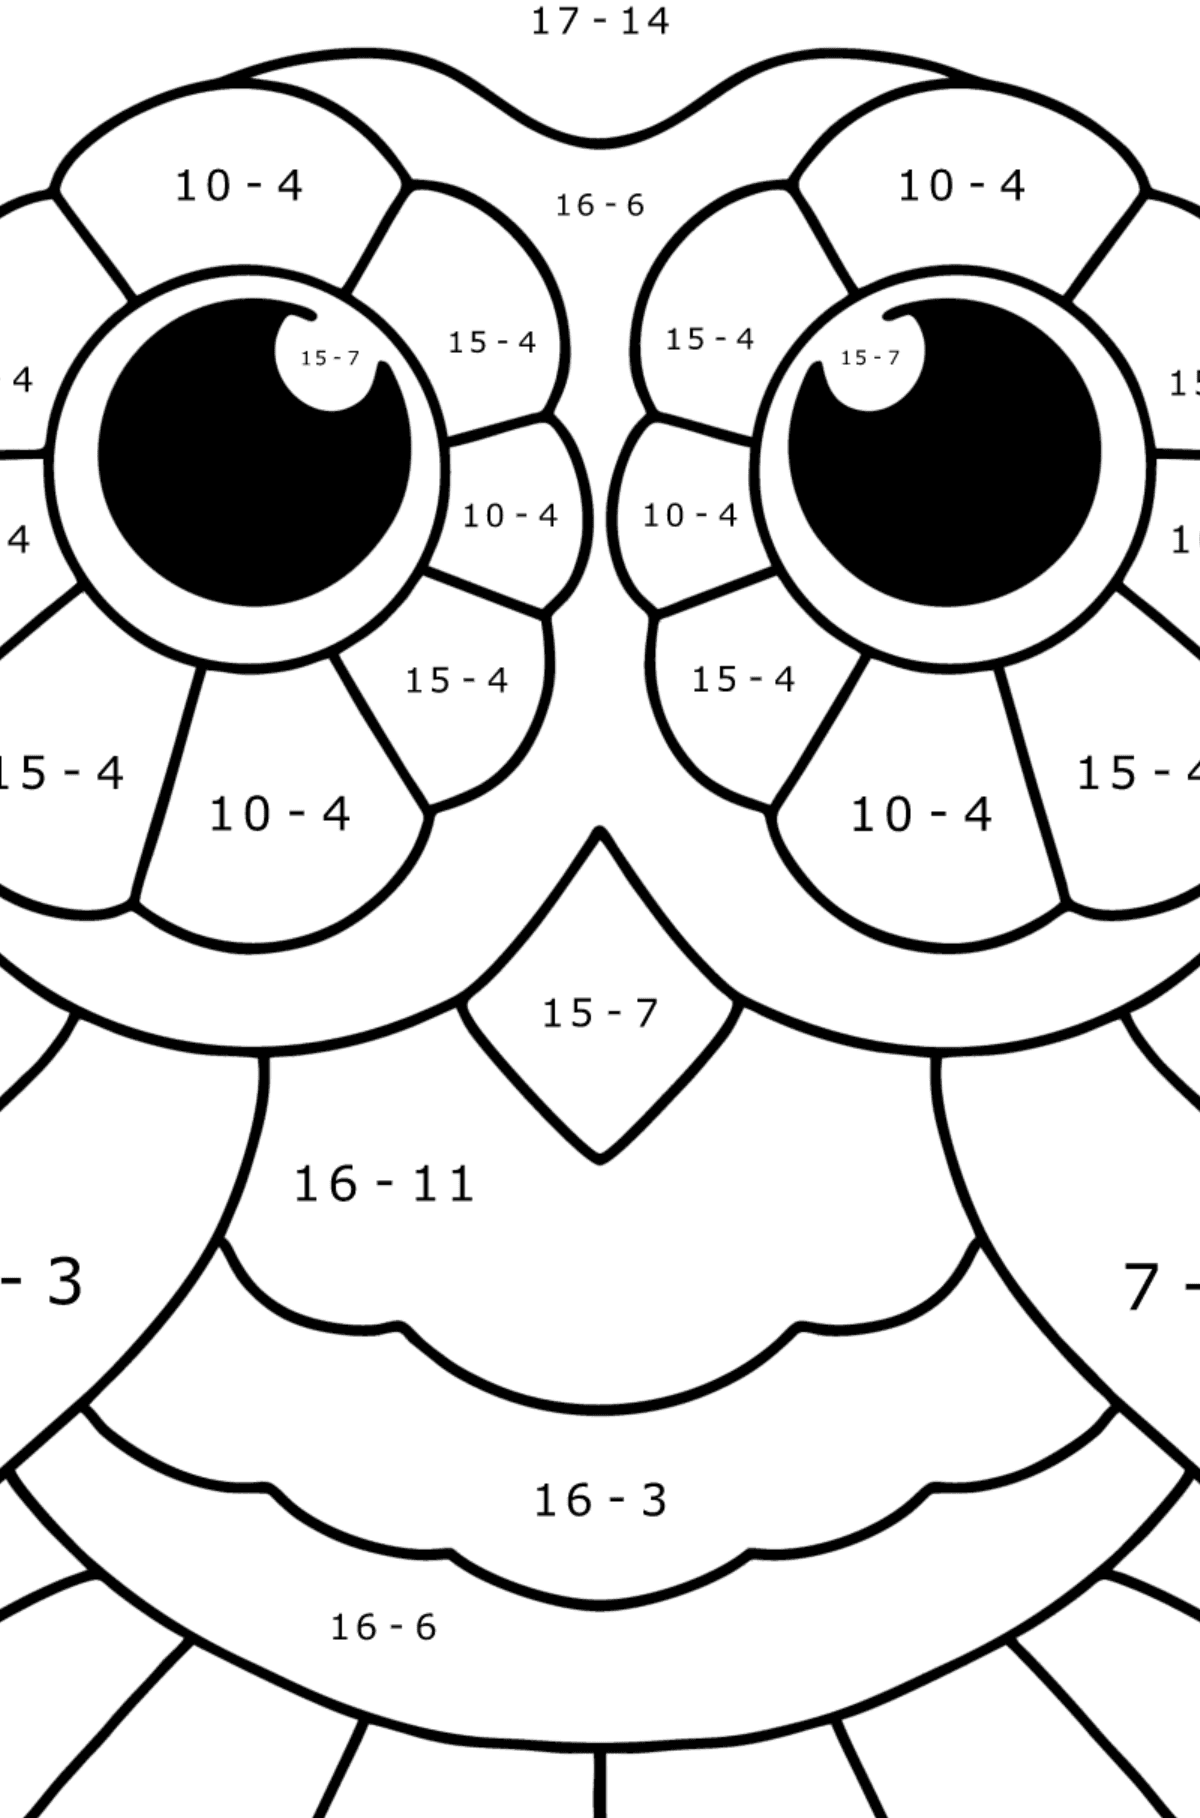 Easy stress relief coloring page - Owl - Math Coloring - Subtraction for Kids